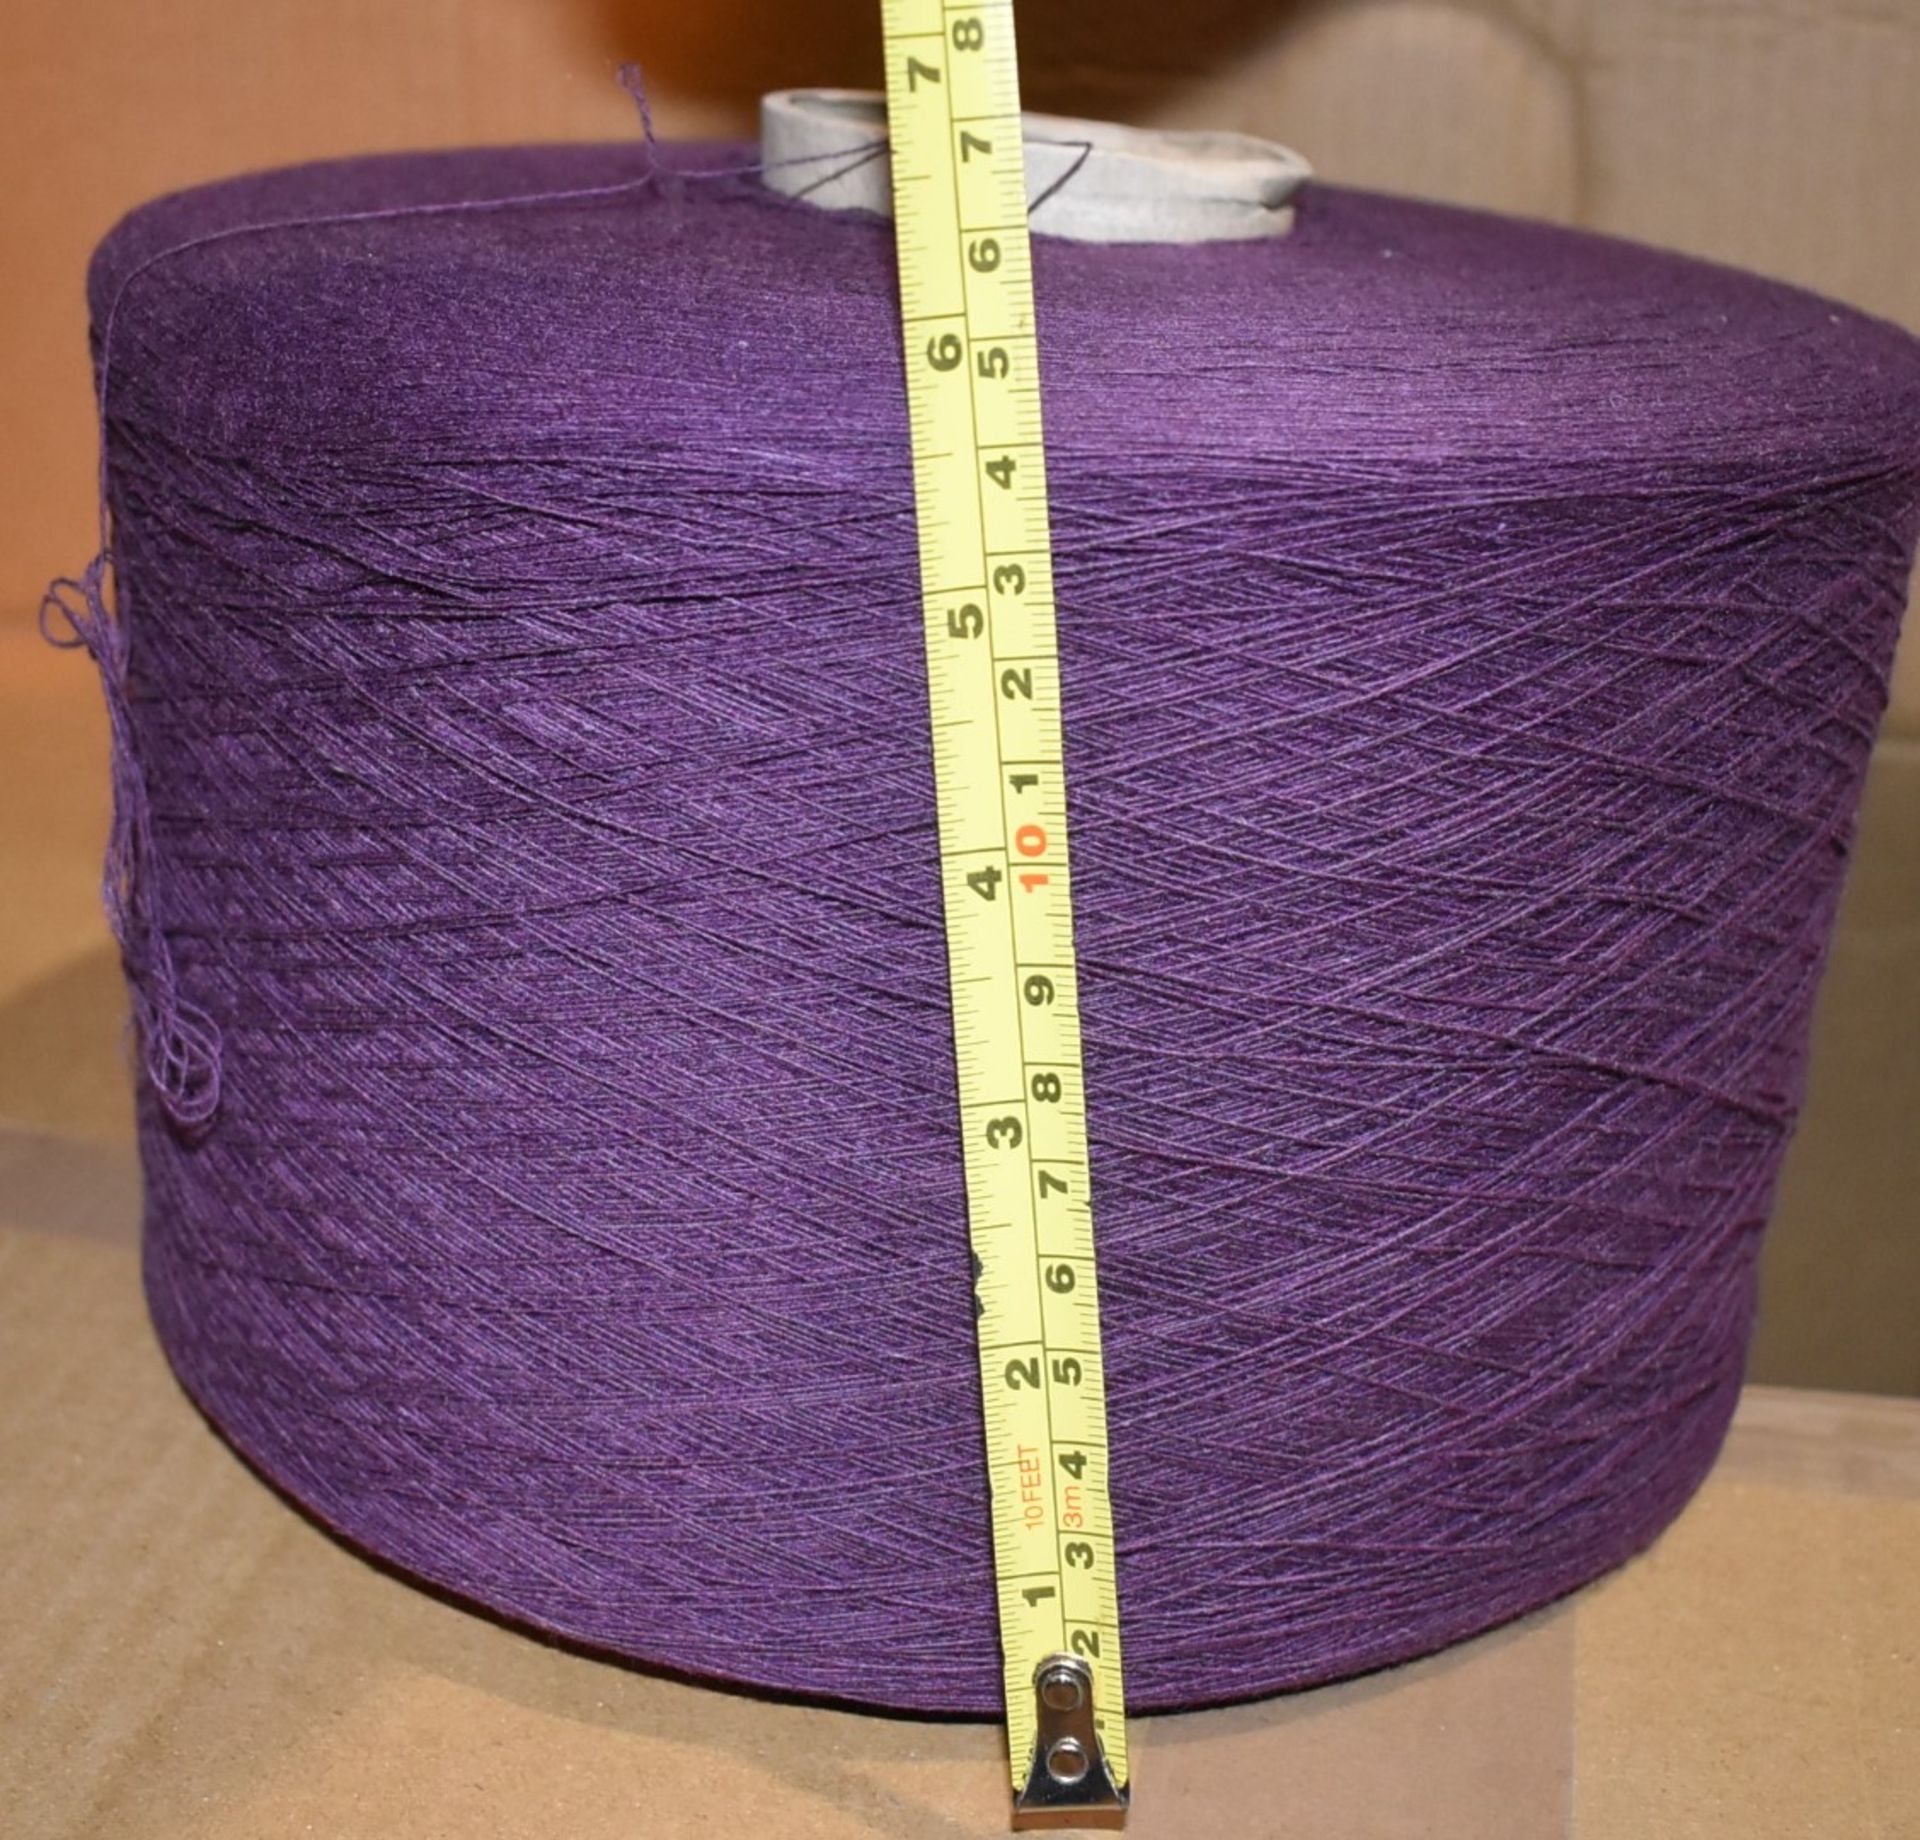 12 x Cones of 1/13 MicroCotton Knitting Yarn - Purple - Approx Weight: 2,300g - New Stock ABL Yarn - Image 8 of 9